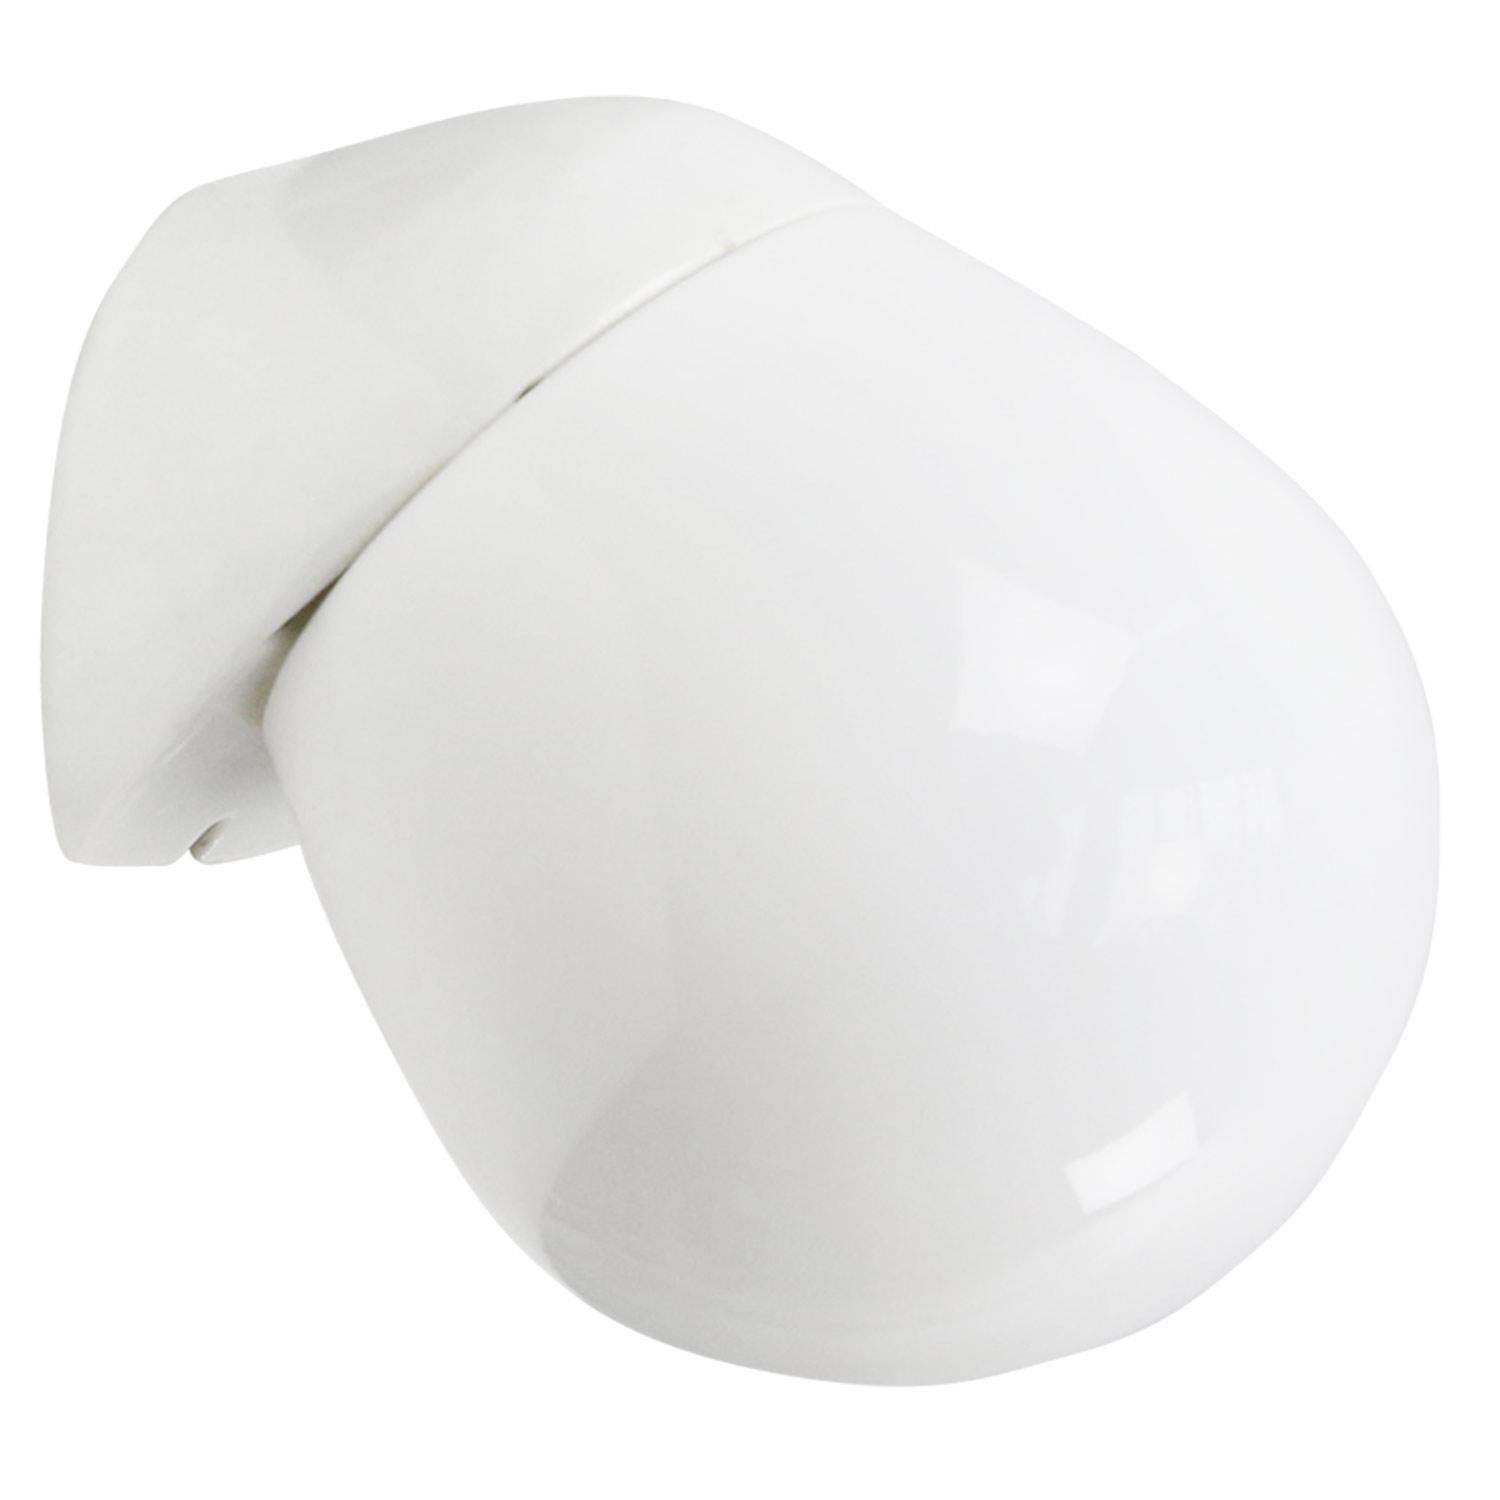 Porcelain wall lamp / scone by Lindner no. 6010
Designed by Wilhelm Wagenfeld
White porcelain, white opaline glass.

2 Conductors, no earth wire.
Suitable for 120 volt USA
New wiring is UL listed (110 volt) or CE certified (220 volt) 

Weight: 0.80